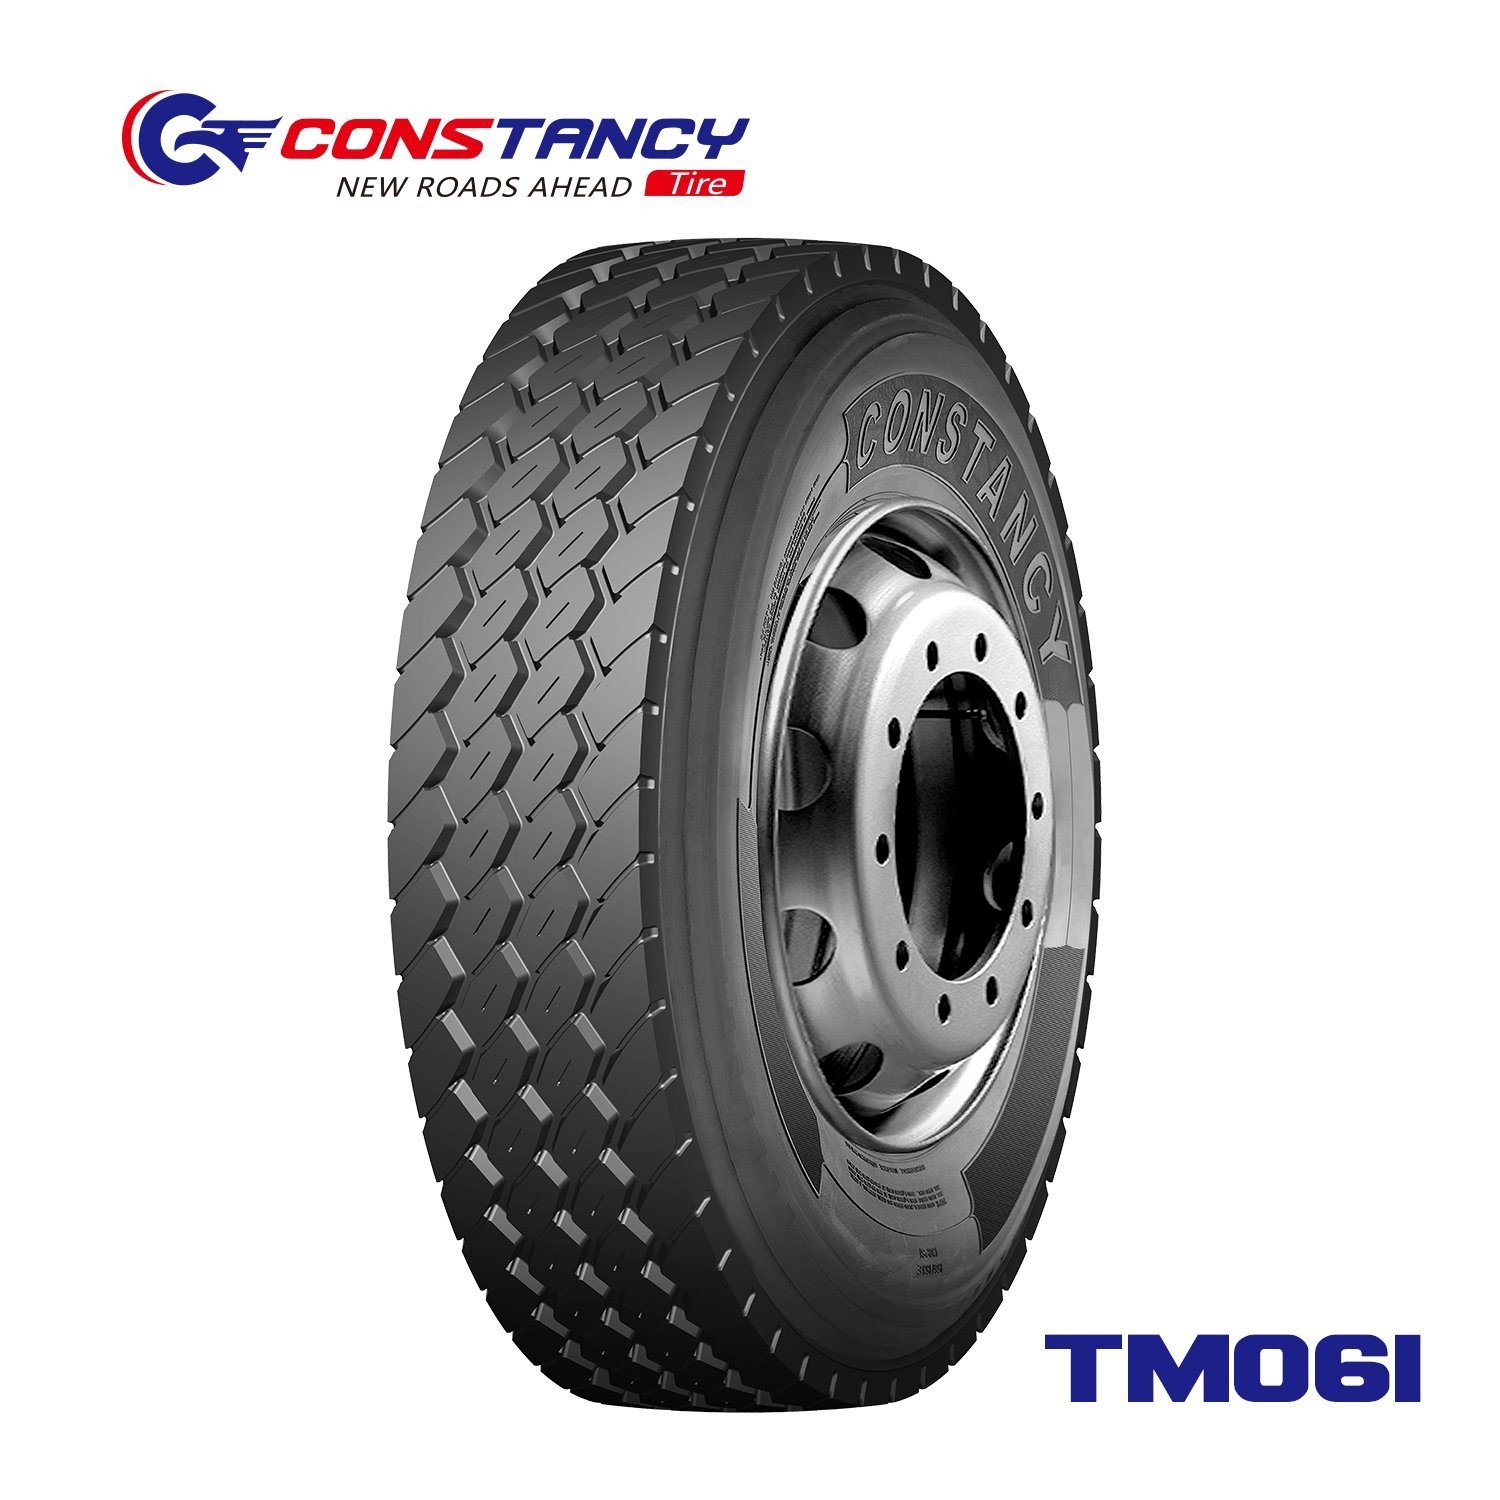 China                  Truck Tyres, Light Truck Tyres (315/80r22.5)              for sale